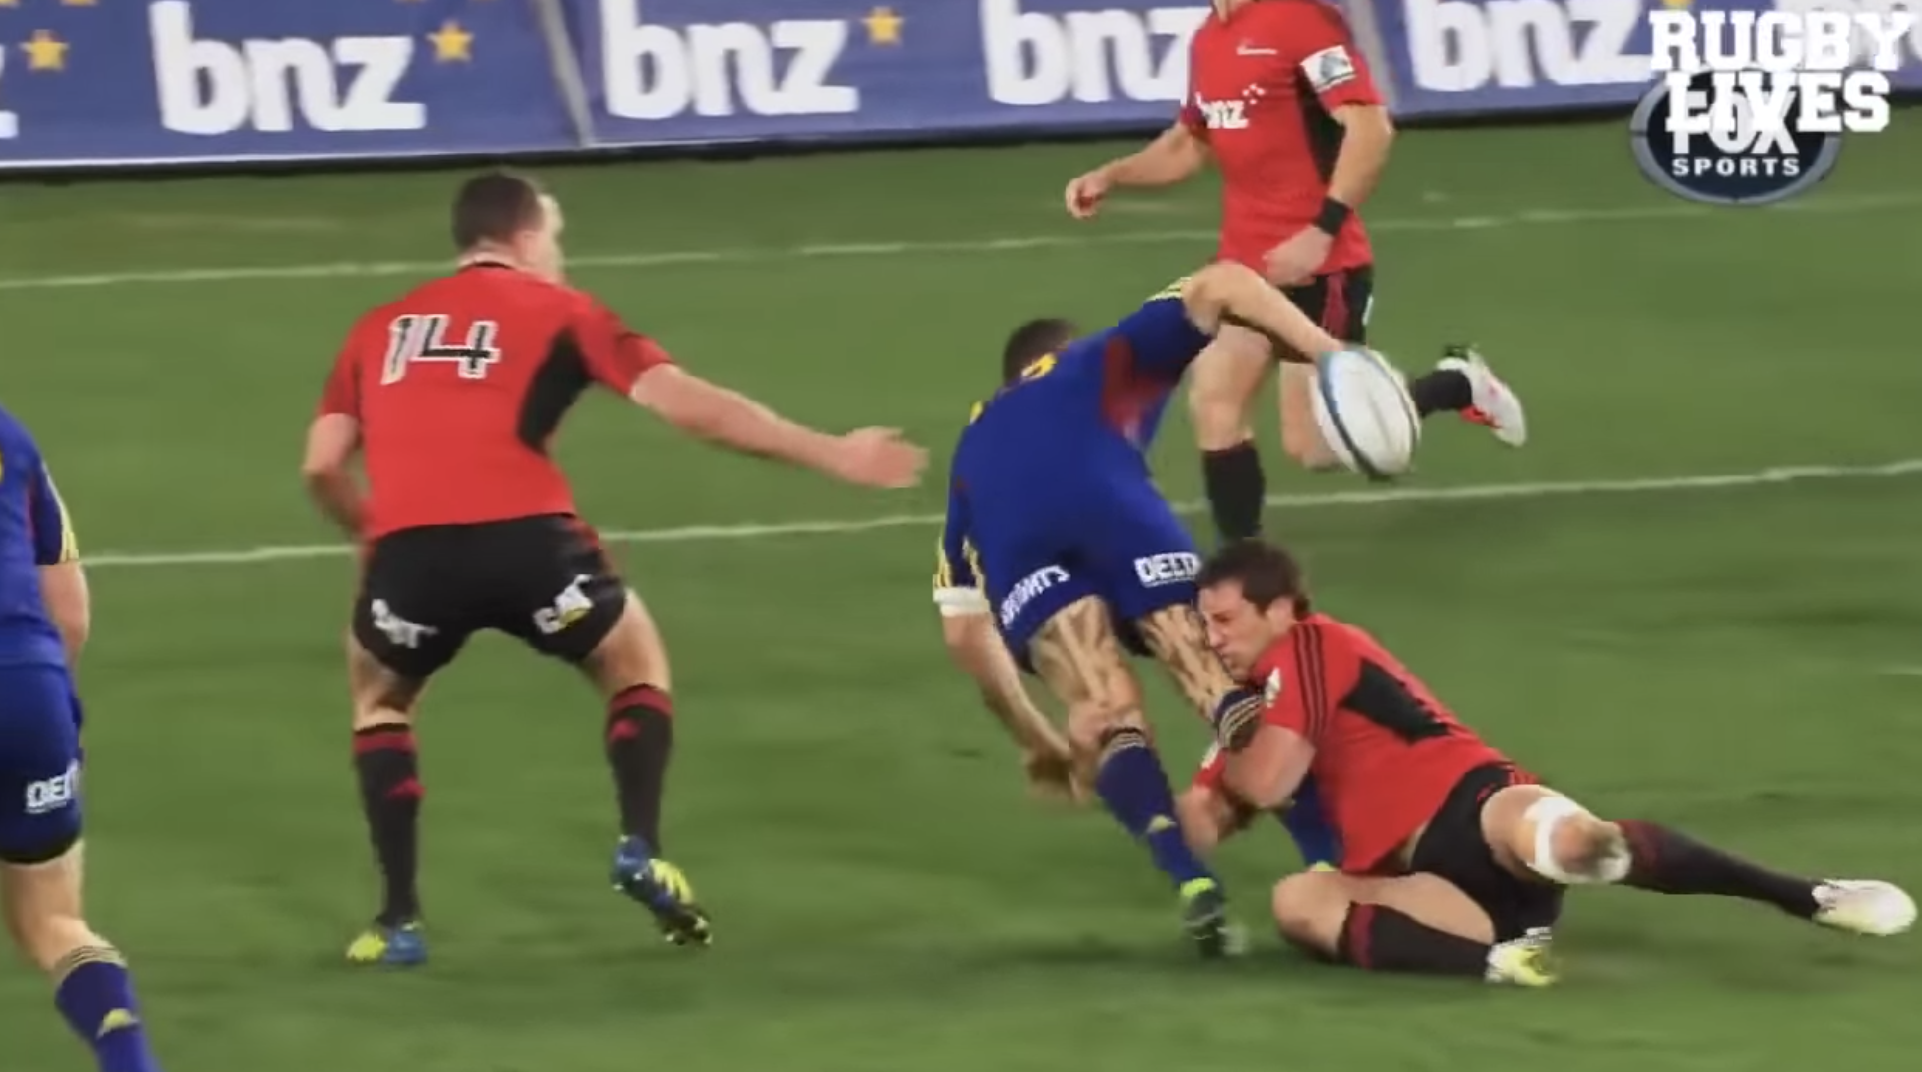 VIDEO: A compilation of some of the best offloads ever is so good you may watch it twice